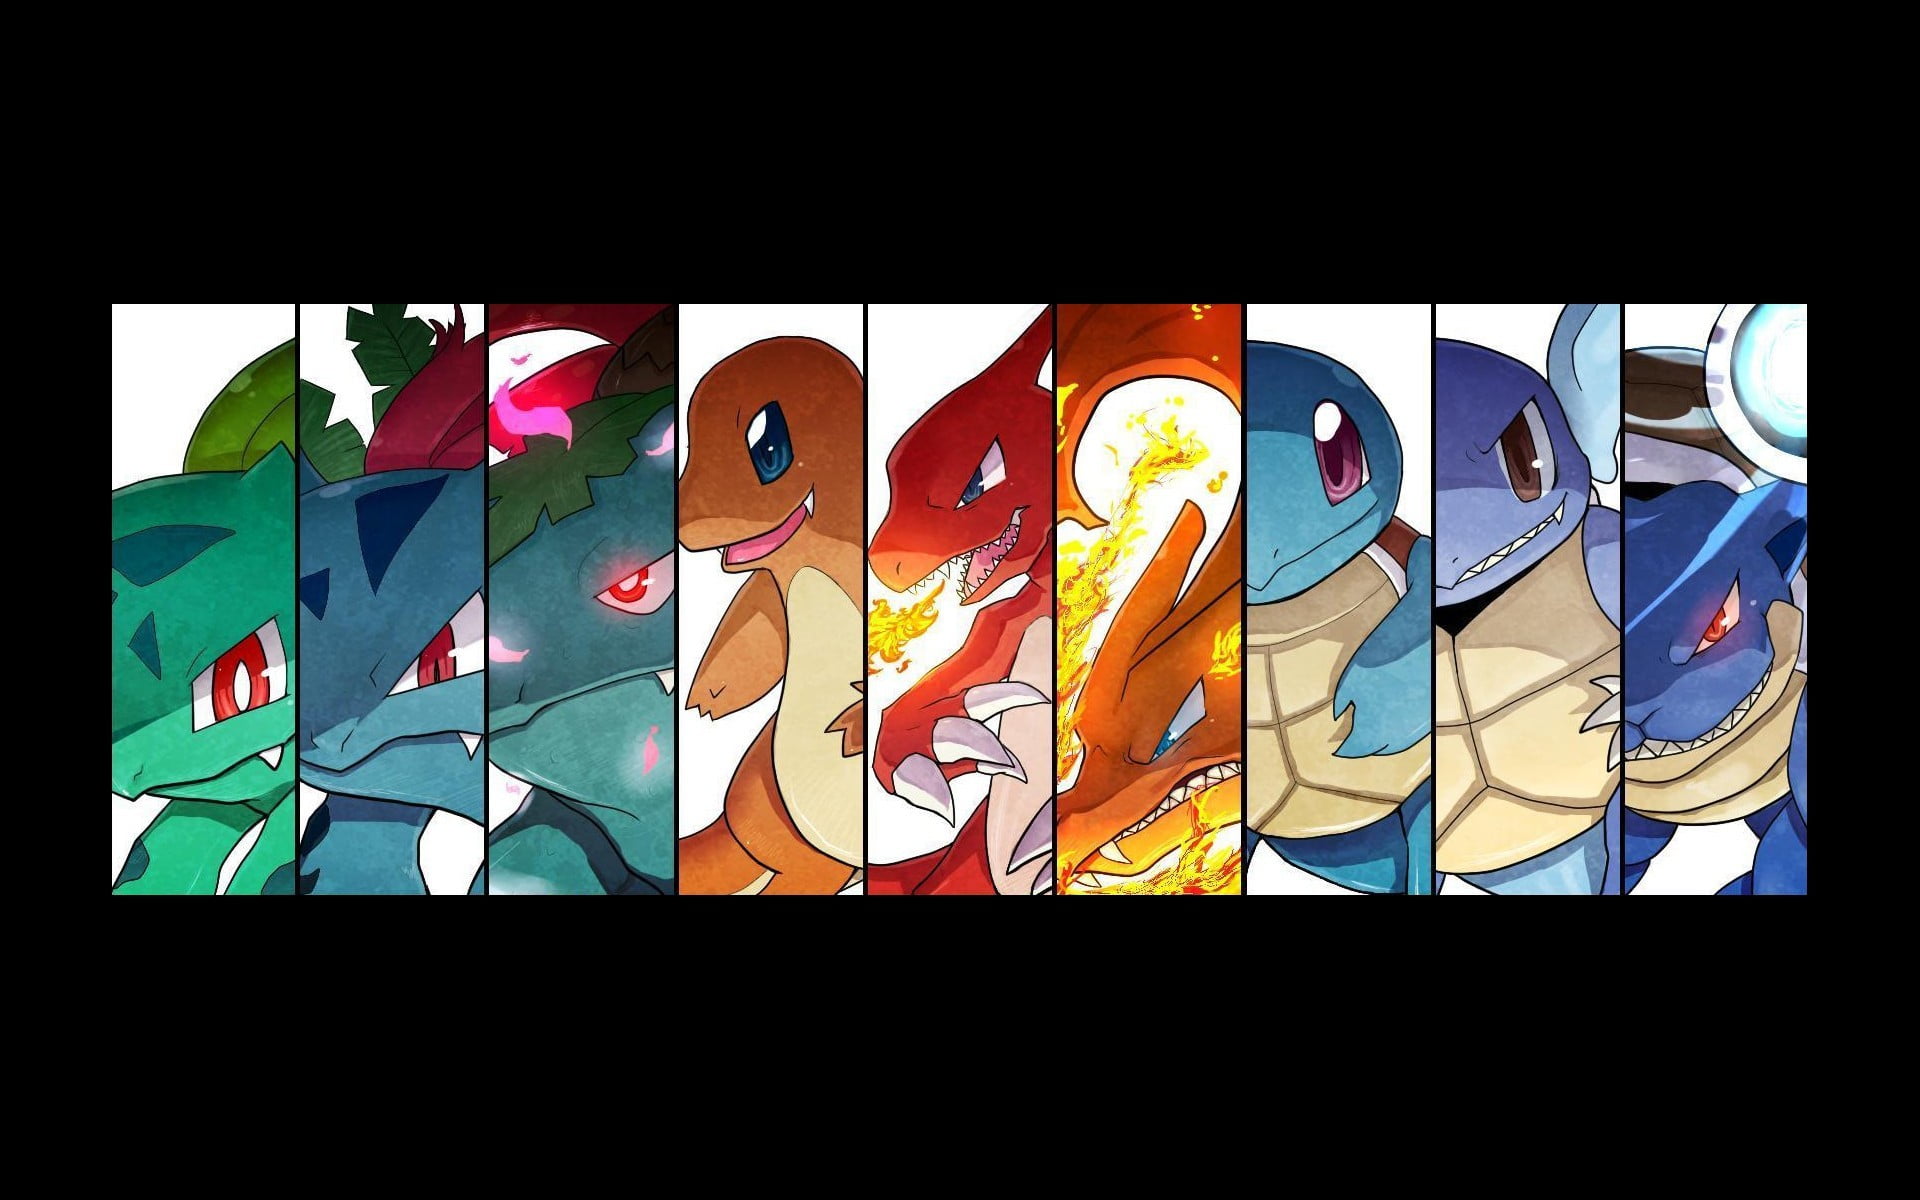 Pokemon character evolve forms